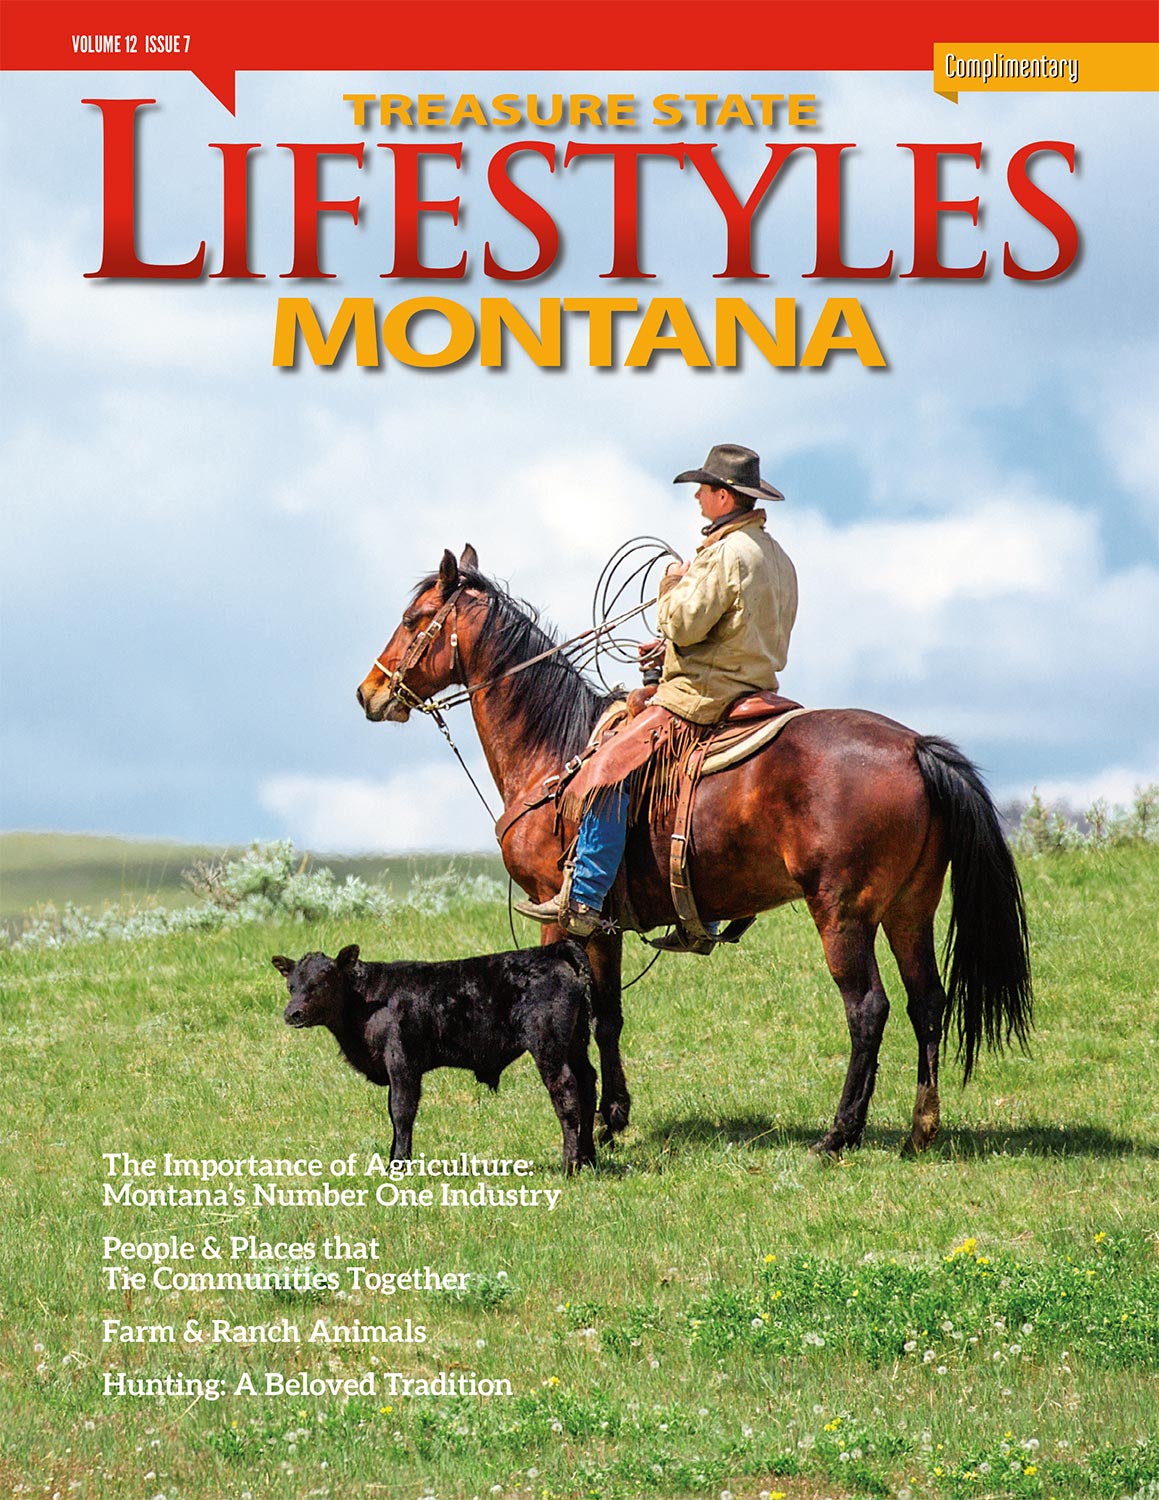 Published Cowboy Photos in Montana